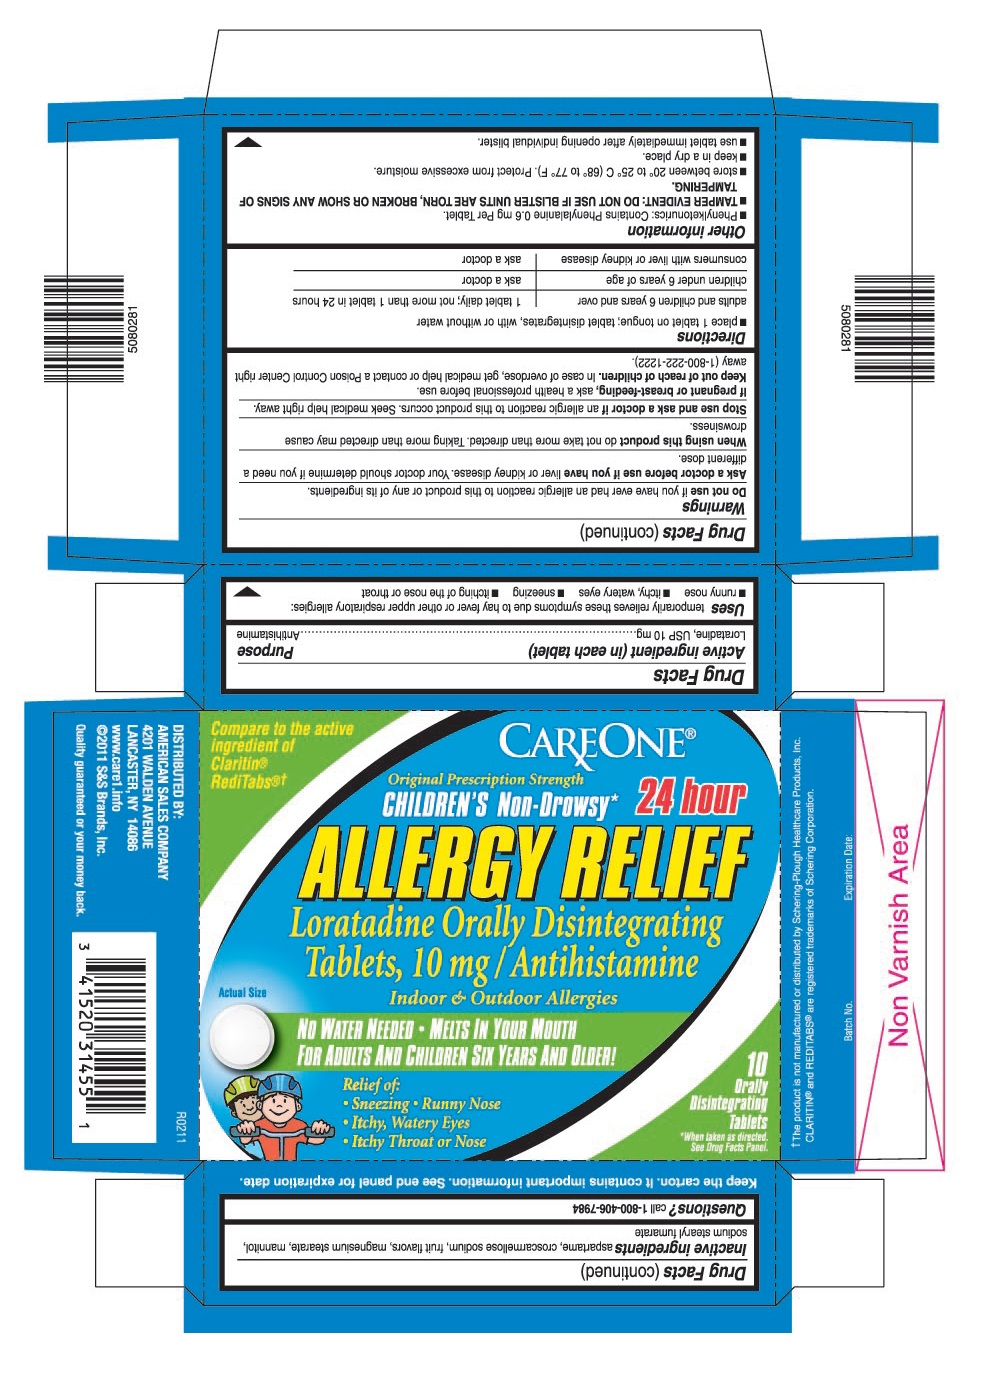 This is the bottle carton label for Careone 10 count Loratadine ODT, 10 mg (Claritin Kids).